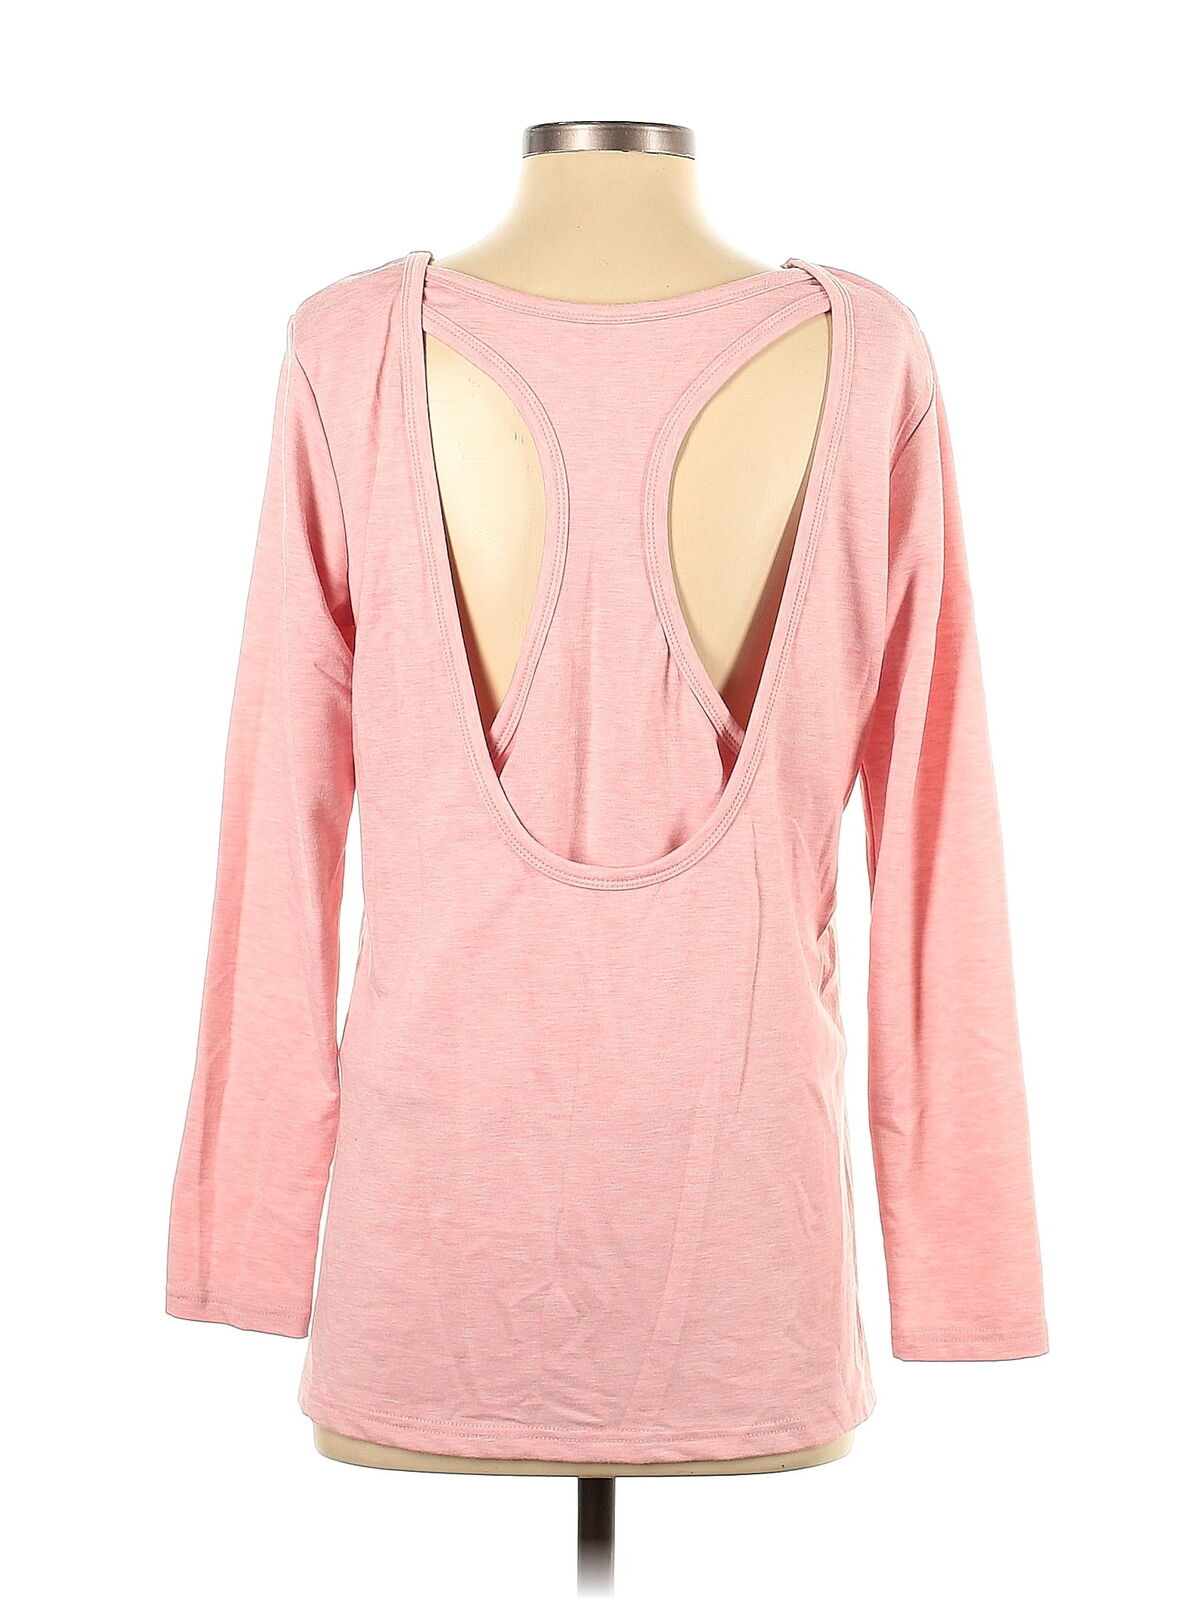 Unbranded Women Pink Long Sleeve Top S - image 2